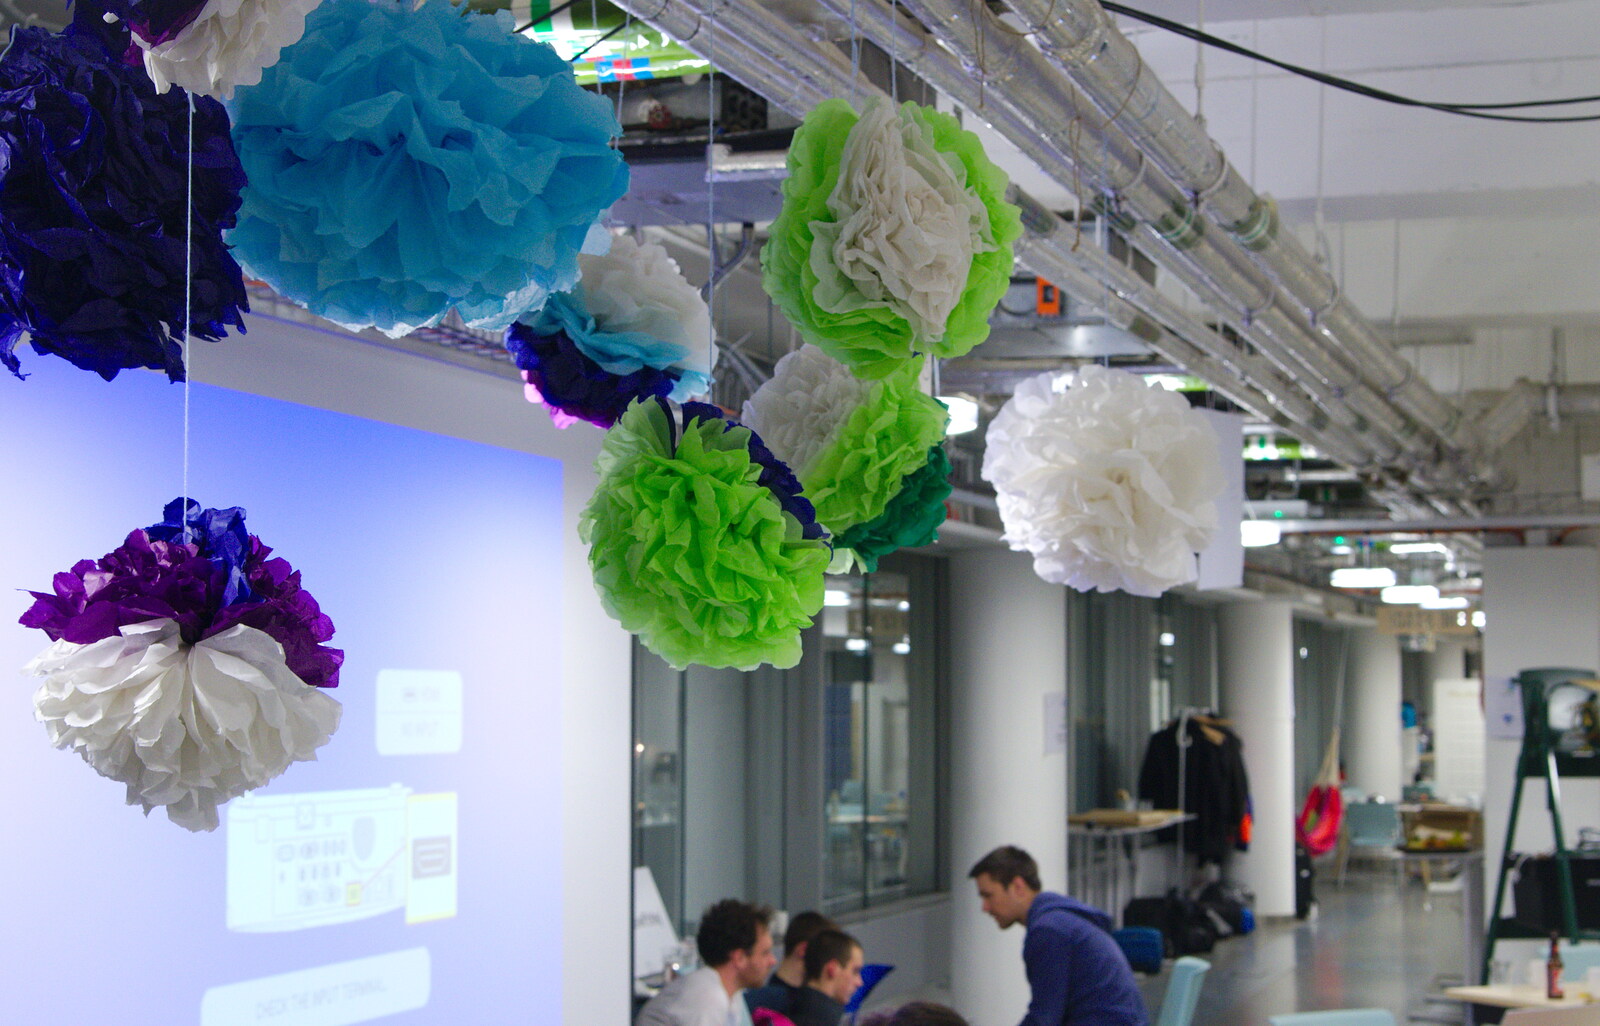 Elly makes pom-poms for some reason from SwiftKey Innovation, The Hub, Westminster, London - 21st February 2014